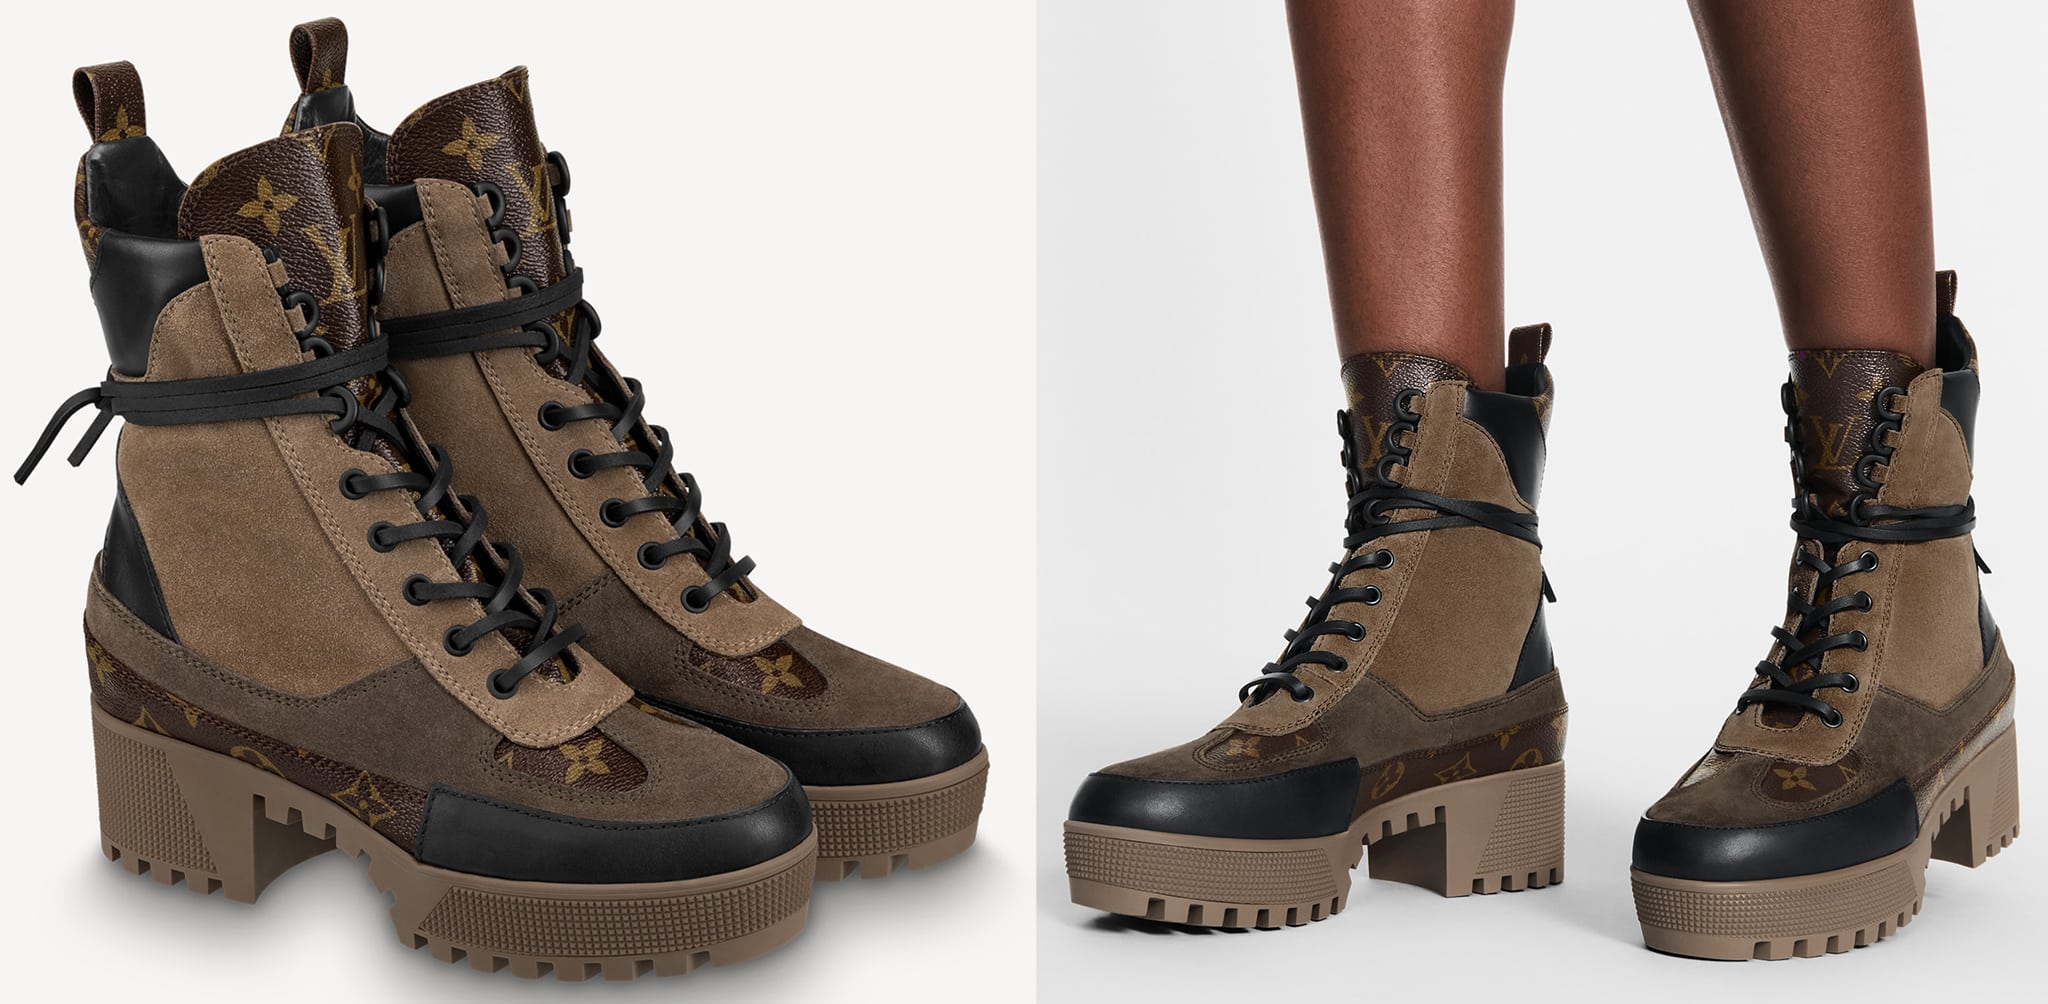 Louis Vuitton's Laureate boots are instantly recognizable with the monogram canvas, wrap-around leather laces, platform construction, and treaded rubber outsole